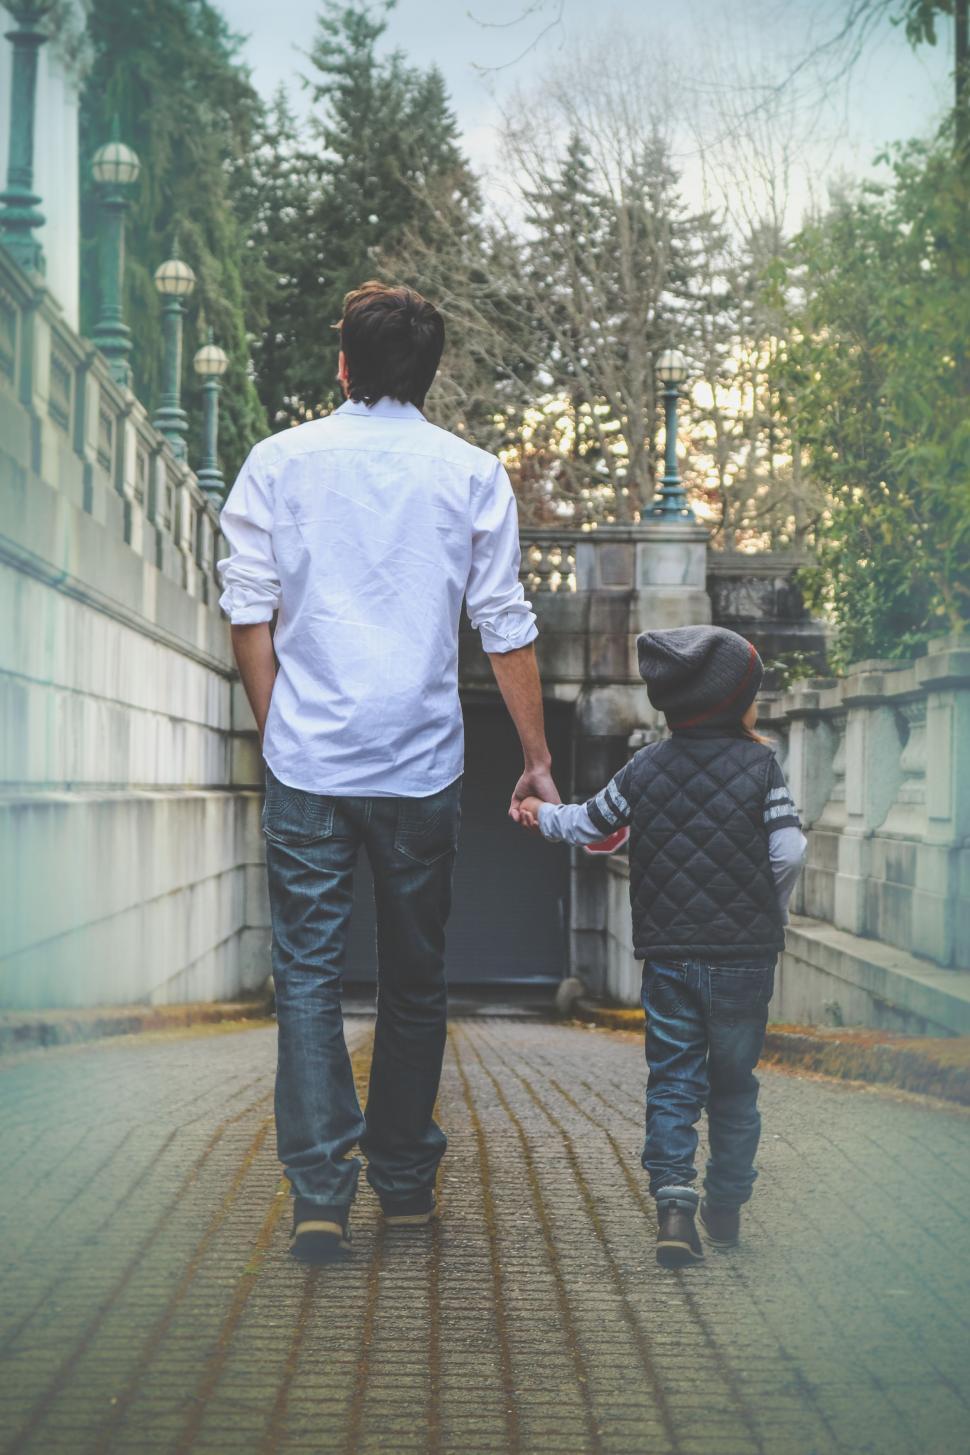 Free Image of Back view of Father and Son Walking Together  